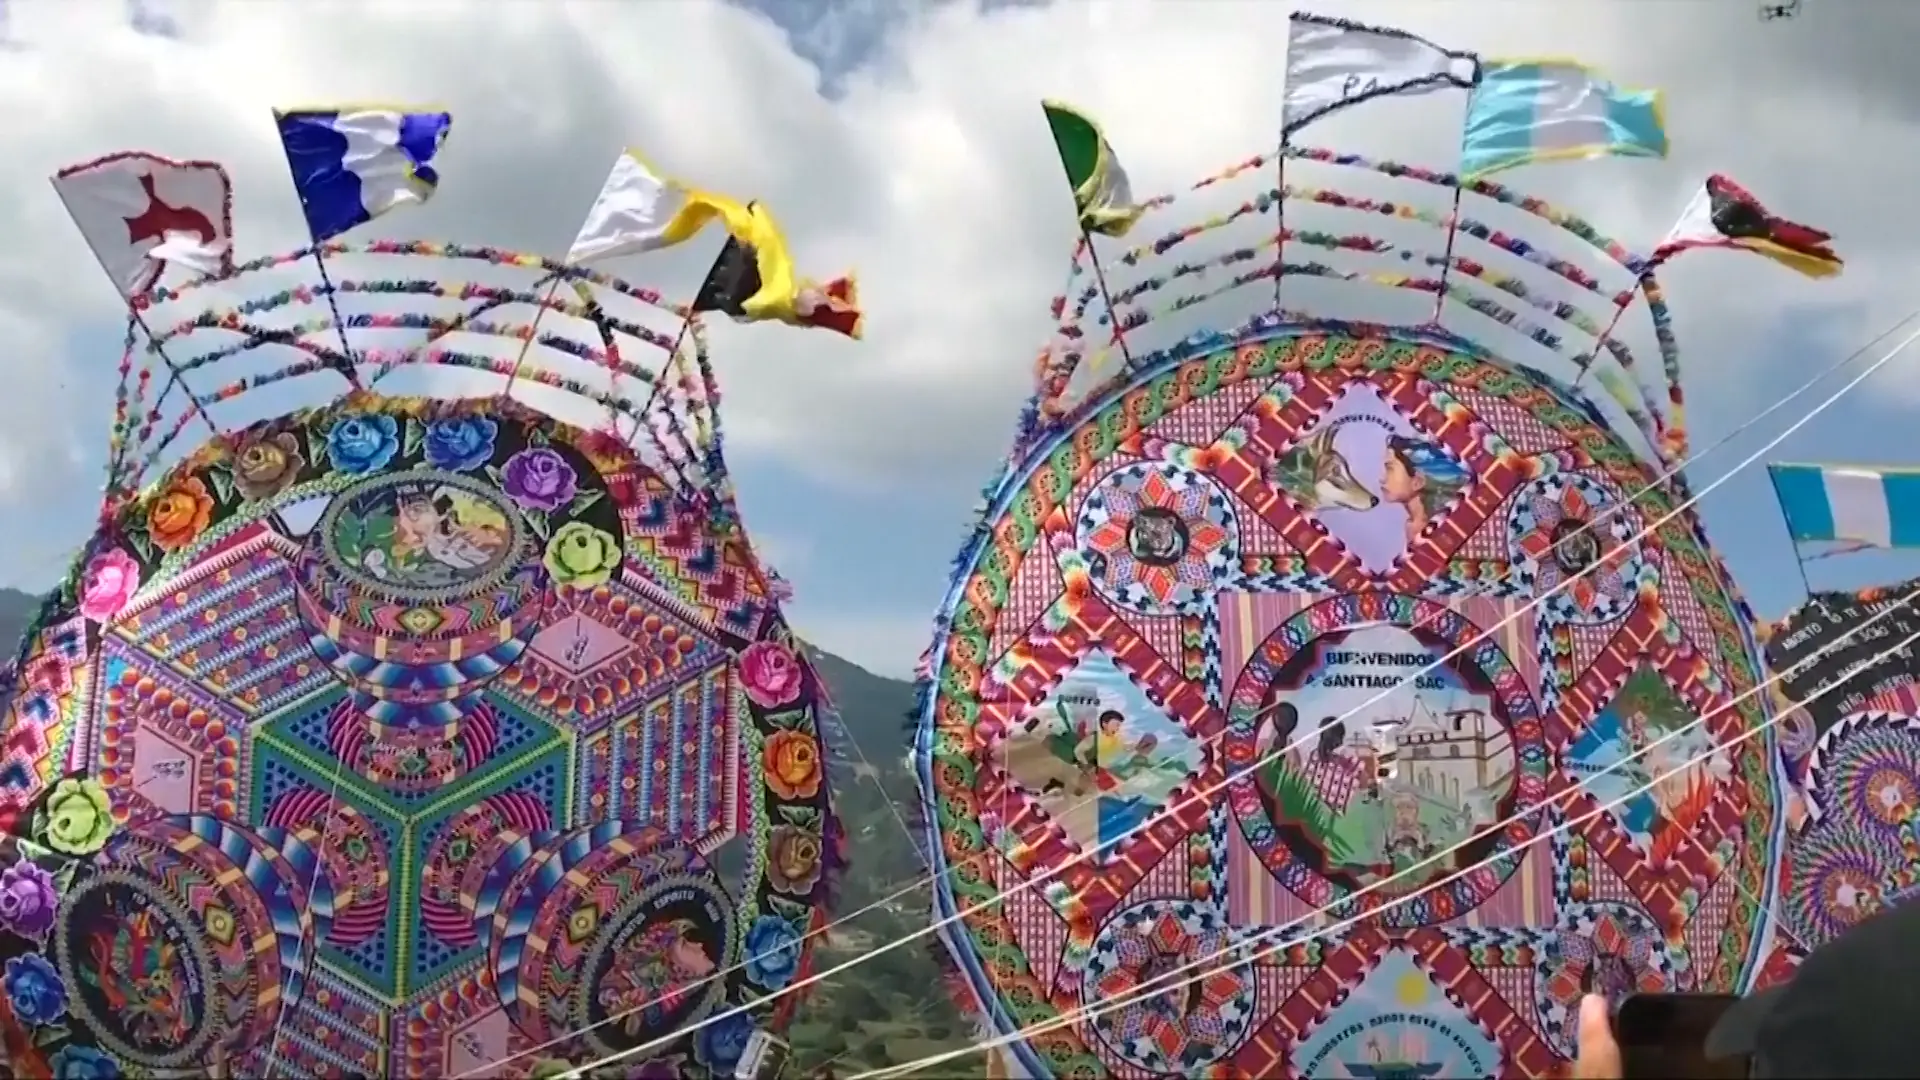 Two-story tall kites anchored to the ground in Santiago Guatemala. The kites are made with traditional multicolor Maya textile patterns and art depicting life in Guatemala. The kites are surrounded by a fringe of fabric and various flags blowing in the wind.